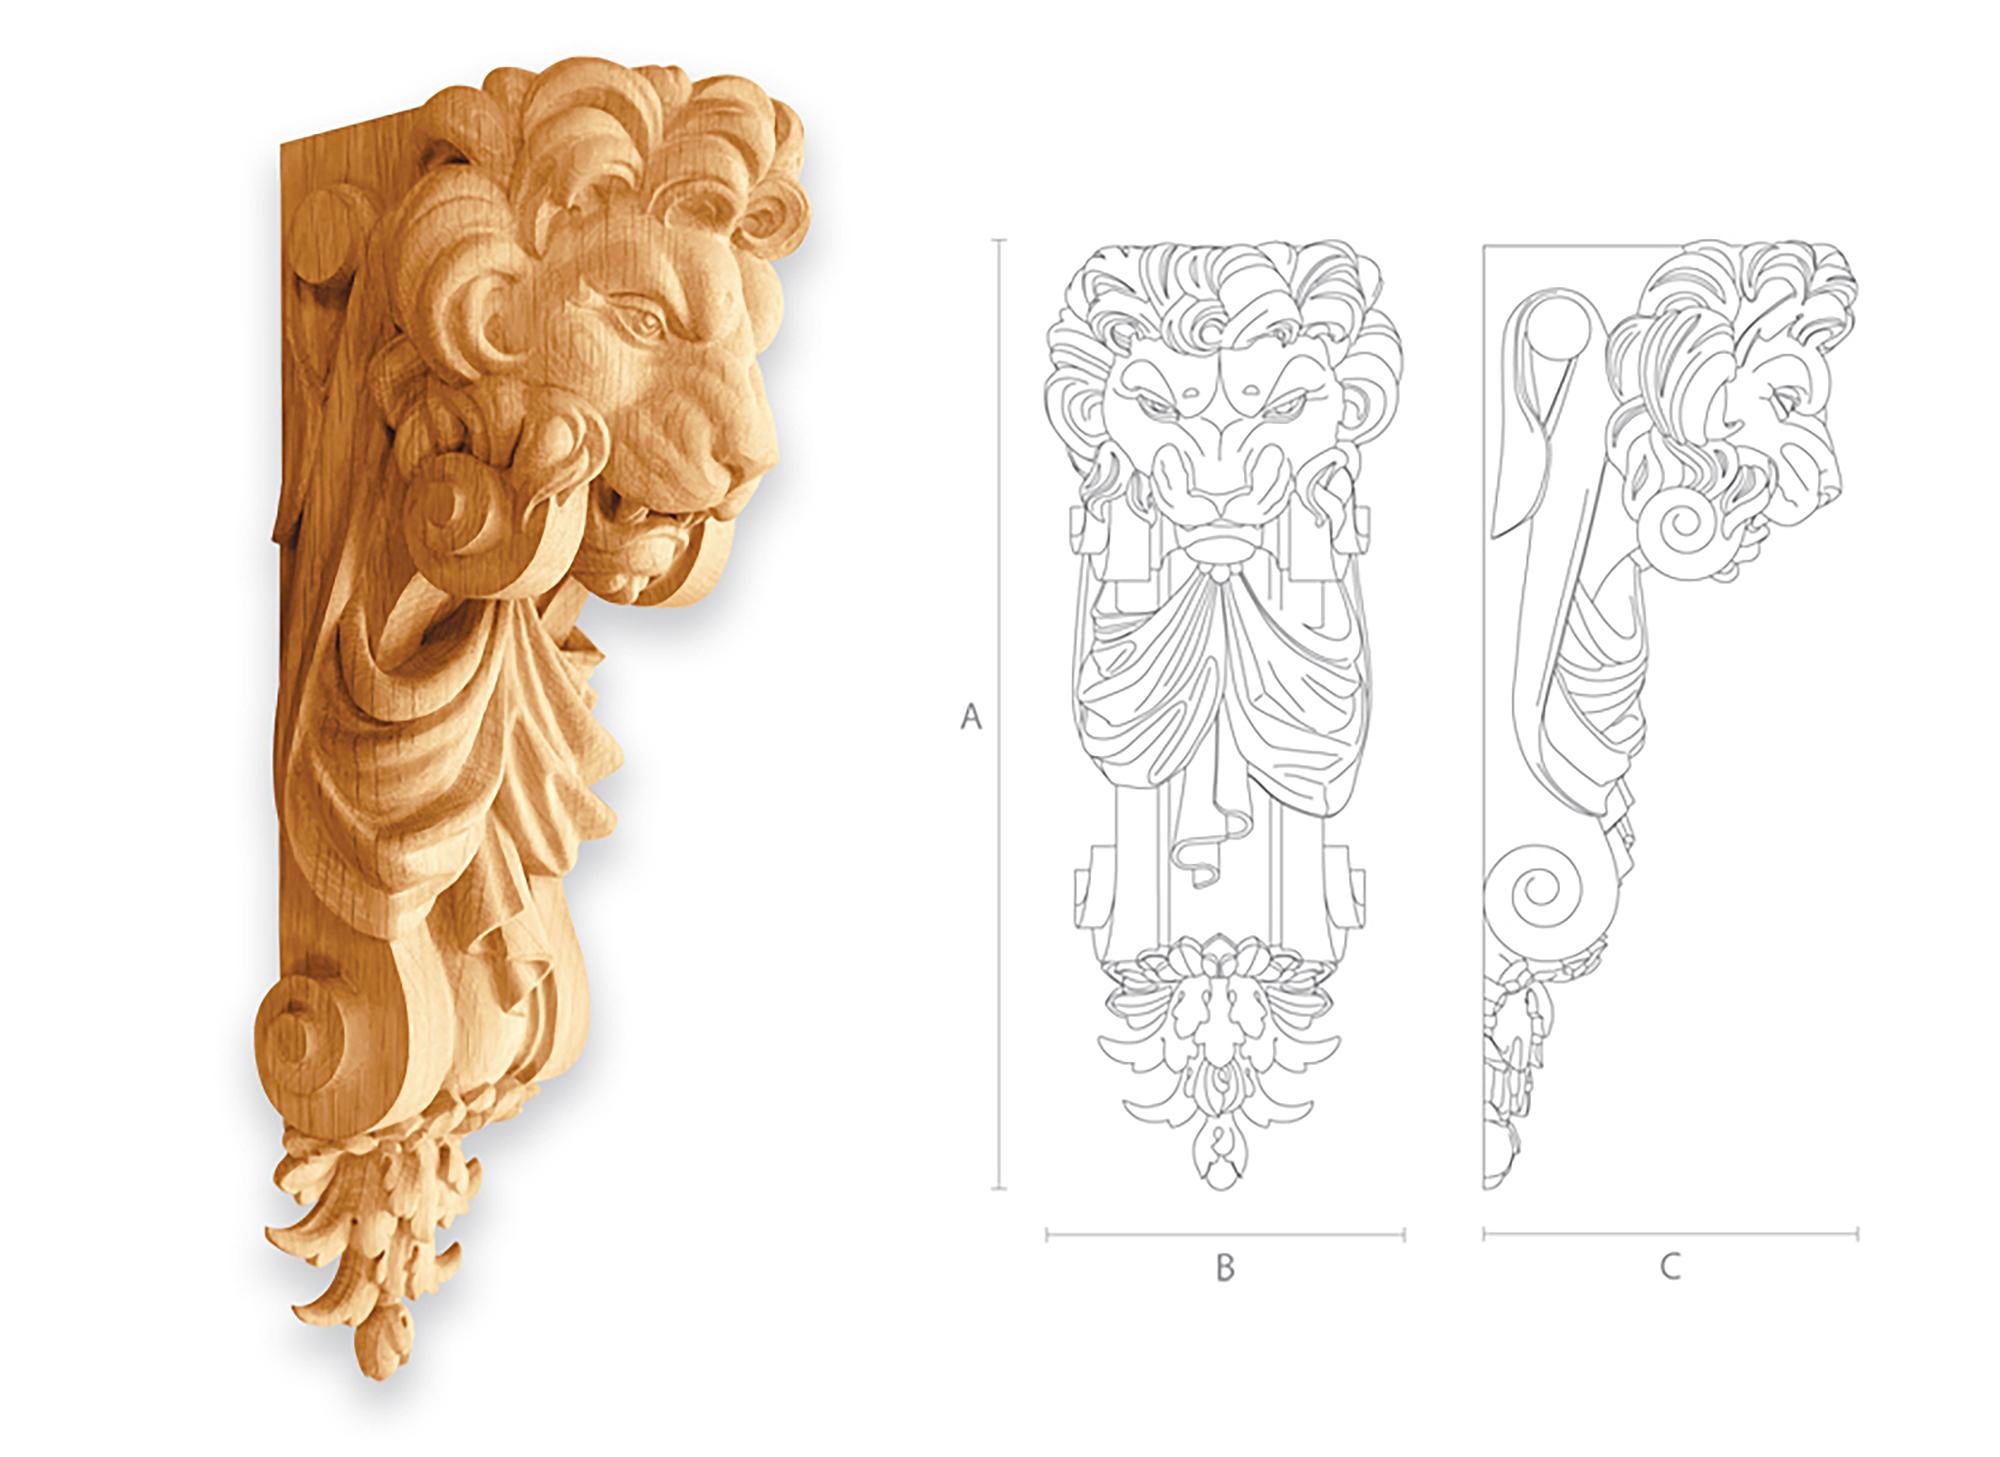 The pair of high-quality unfinished carved wooden corbels lion from oak or beech of your choice.

>> SKU: KR-034

>> Dimensions (A x B x C):

1) 9.33